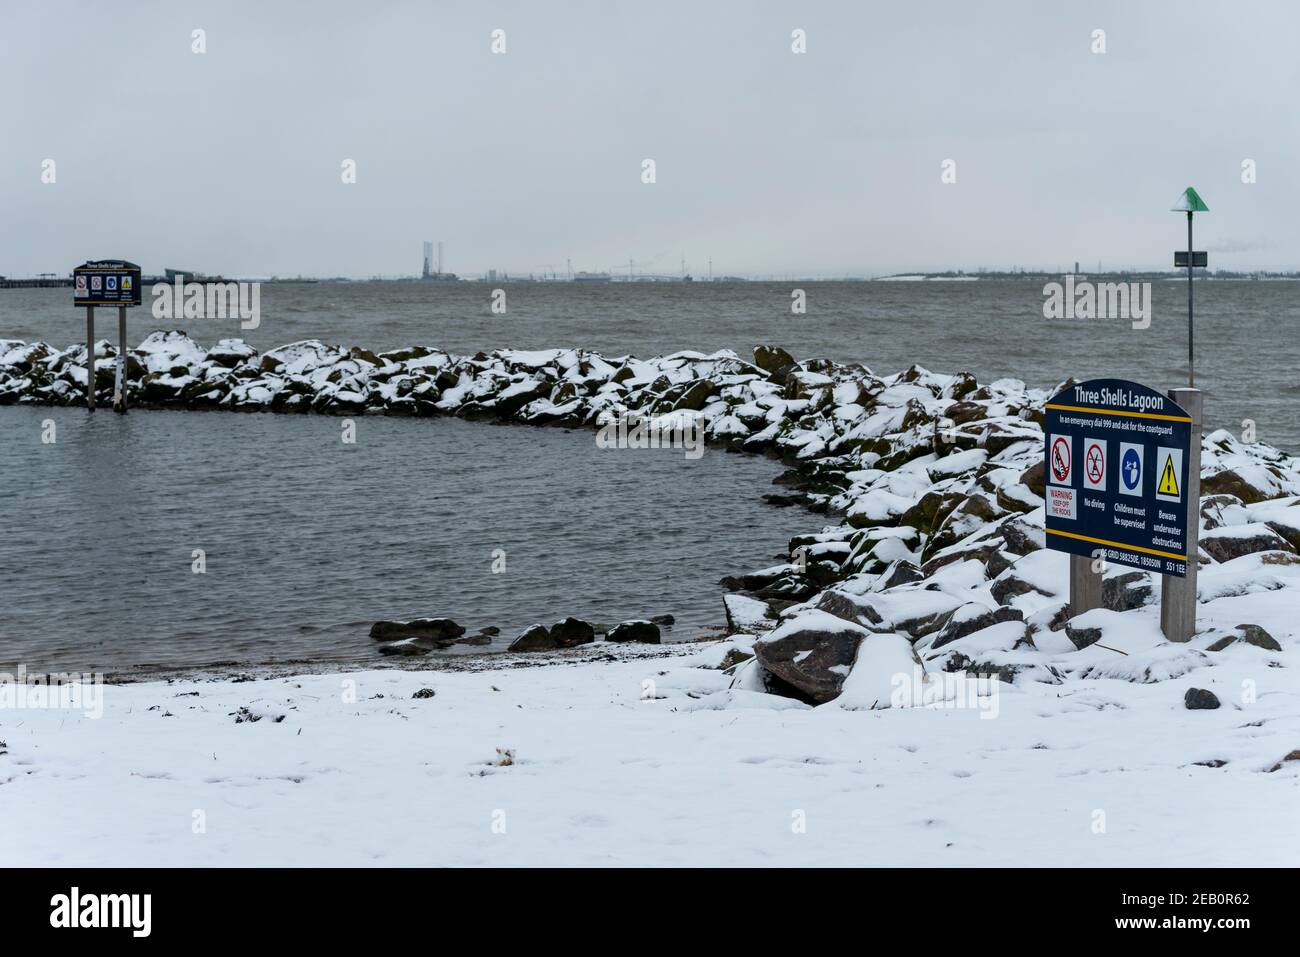 Three Shells Lagoon man made saltwater swimming pool in Southend on Sea, Essex, UK, with snow from Storm Darcy Stock Photo